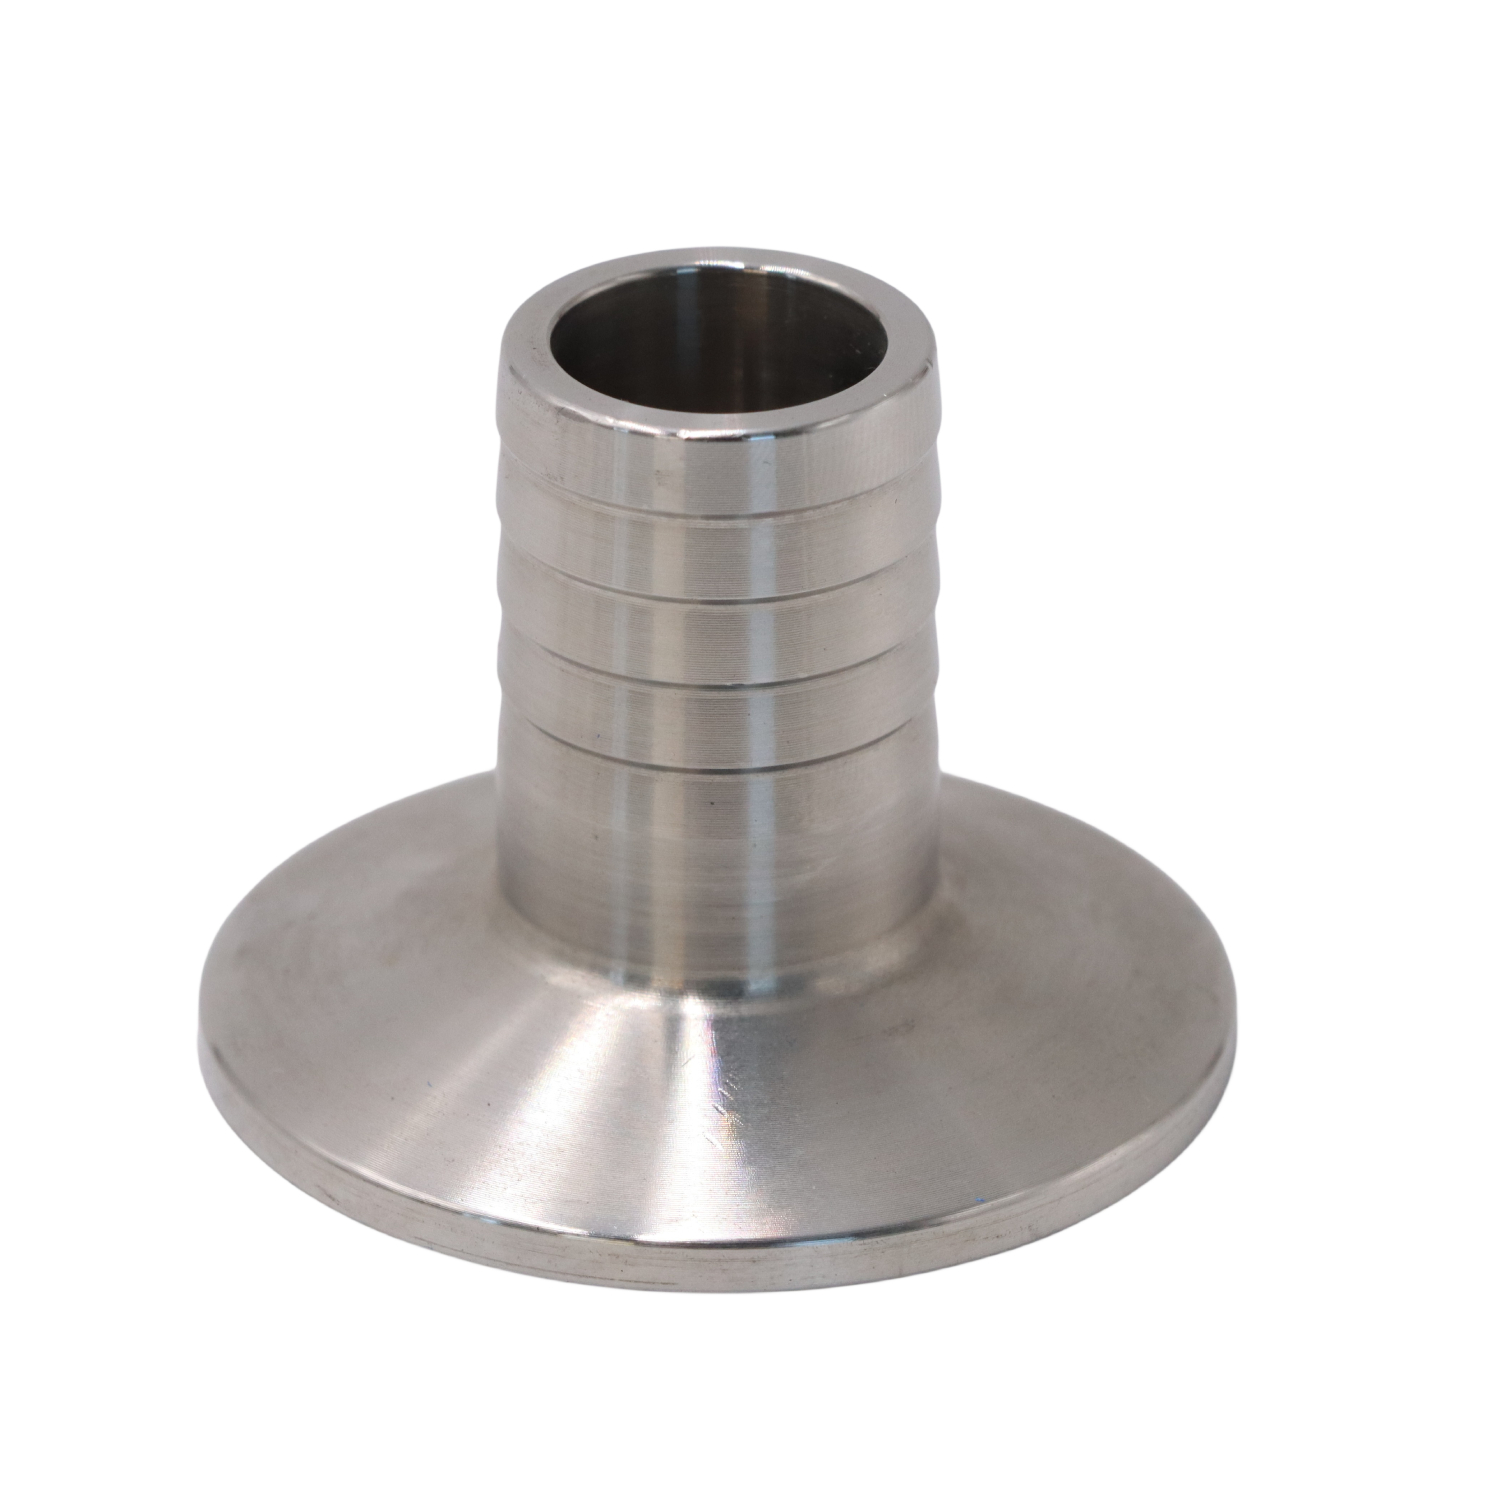 SS316 Stainless Steel Sanitary SMS-14MPHR JN-FL 23 2008 High Pressure Clamped Hose Coupling Adapter For Beverages